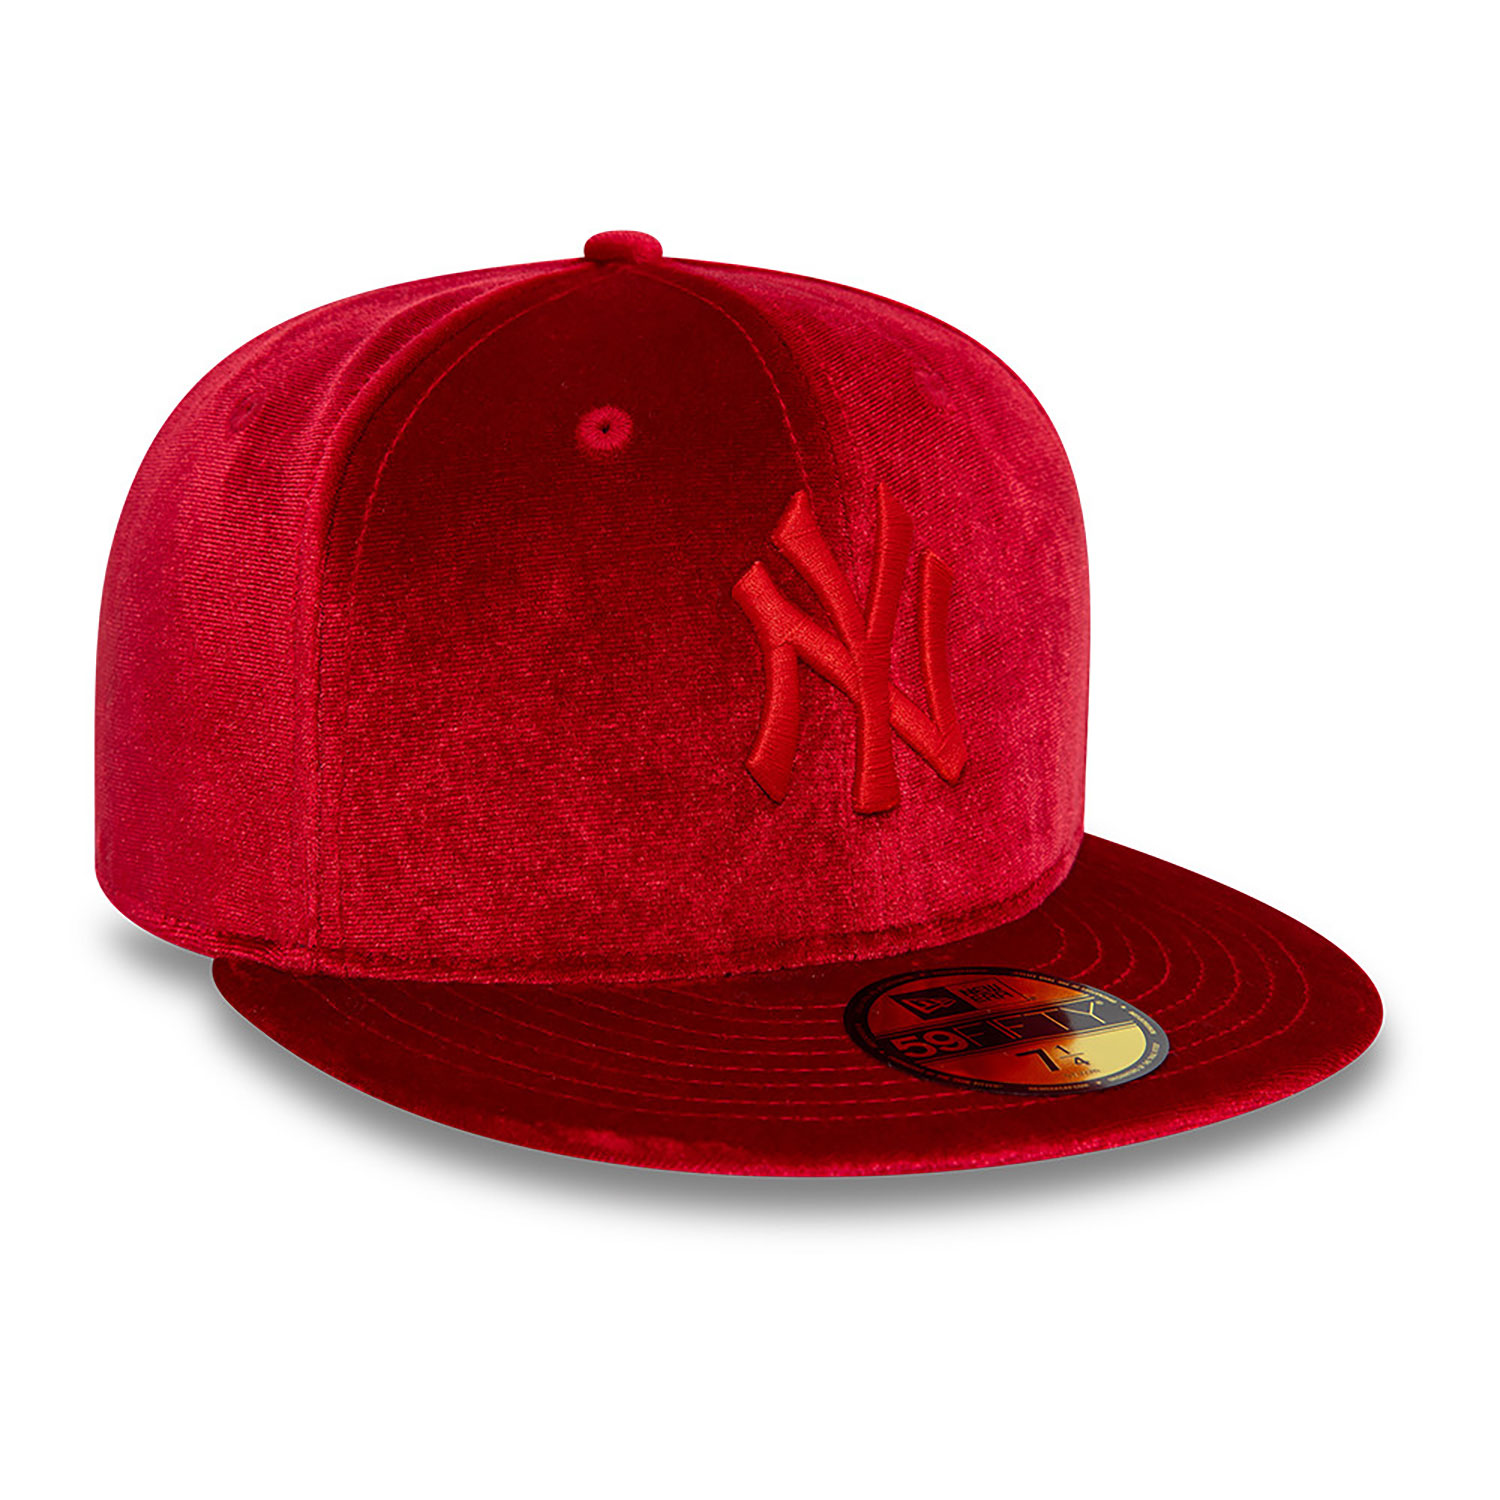 New York Yankees Velvet Satin Lunar New Year Red 59FIFTY Fitted Cap